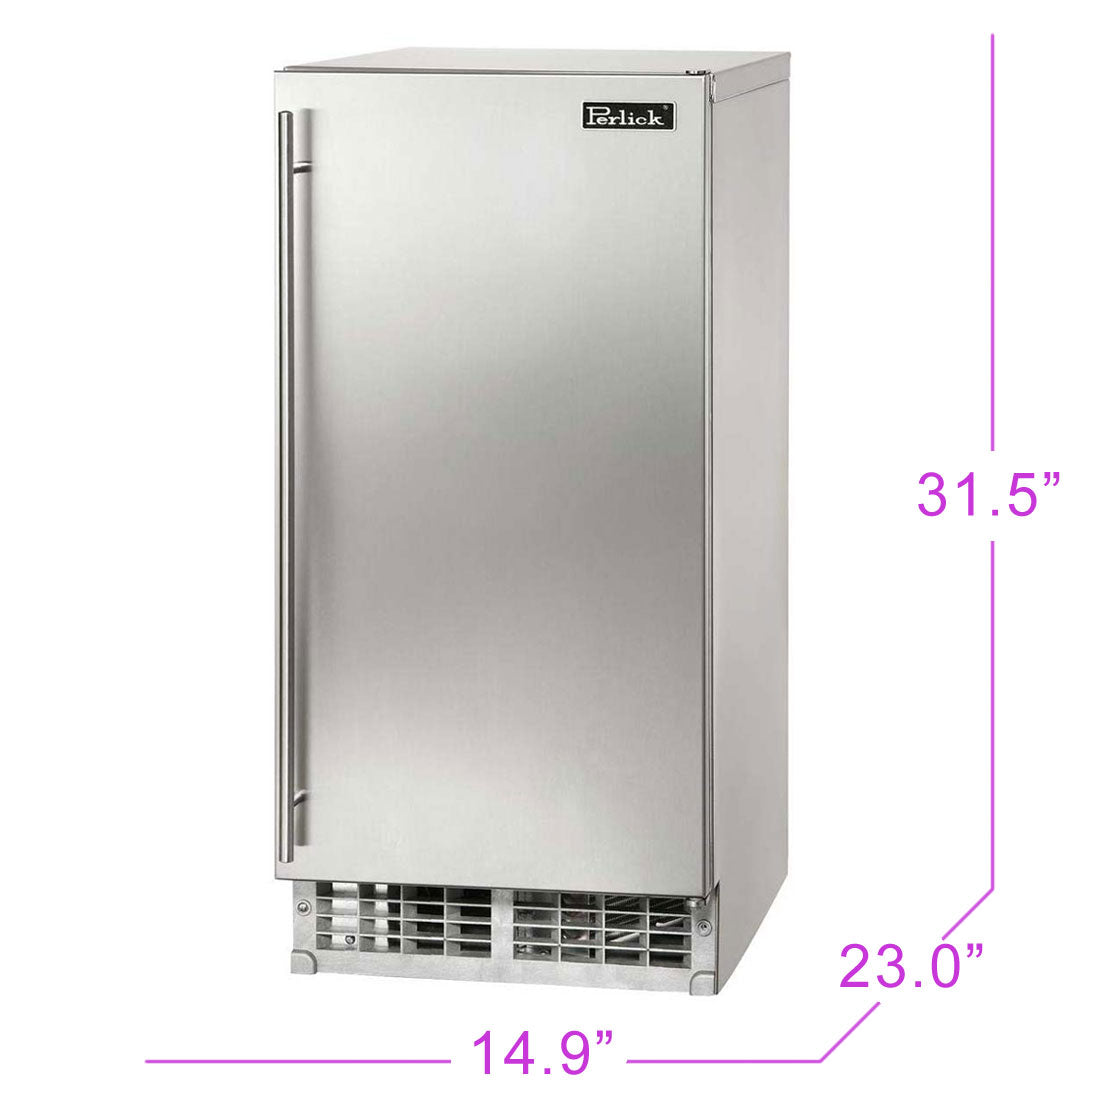 Perlick - 15" ADA height compliant Cubelet Ice Maker with stainless steel solid door- H80CIMS-ADL